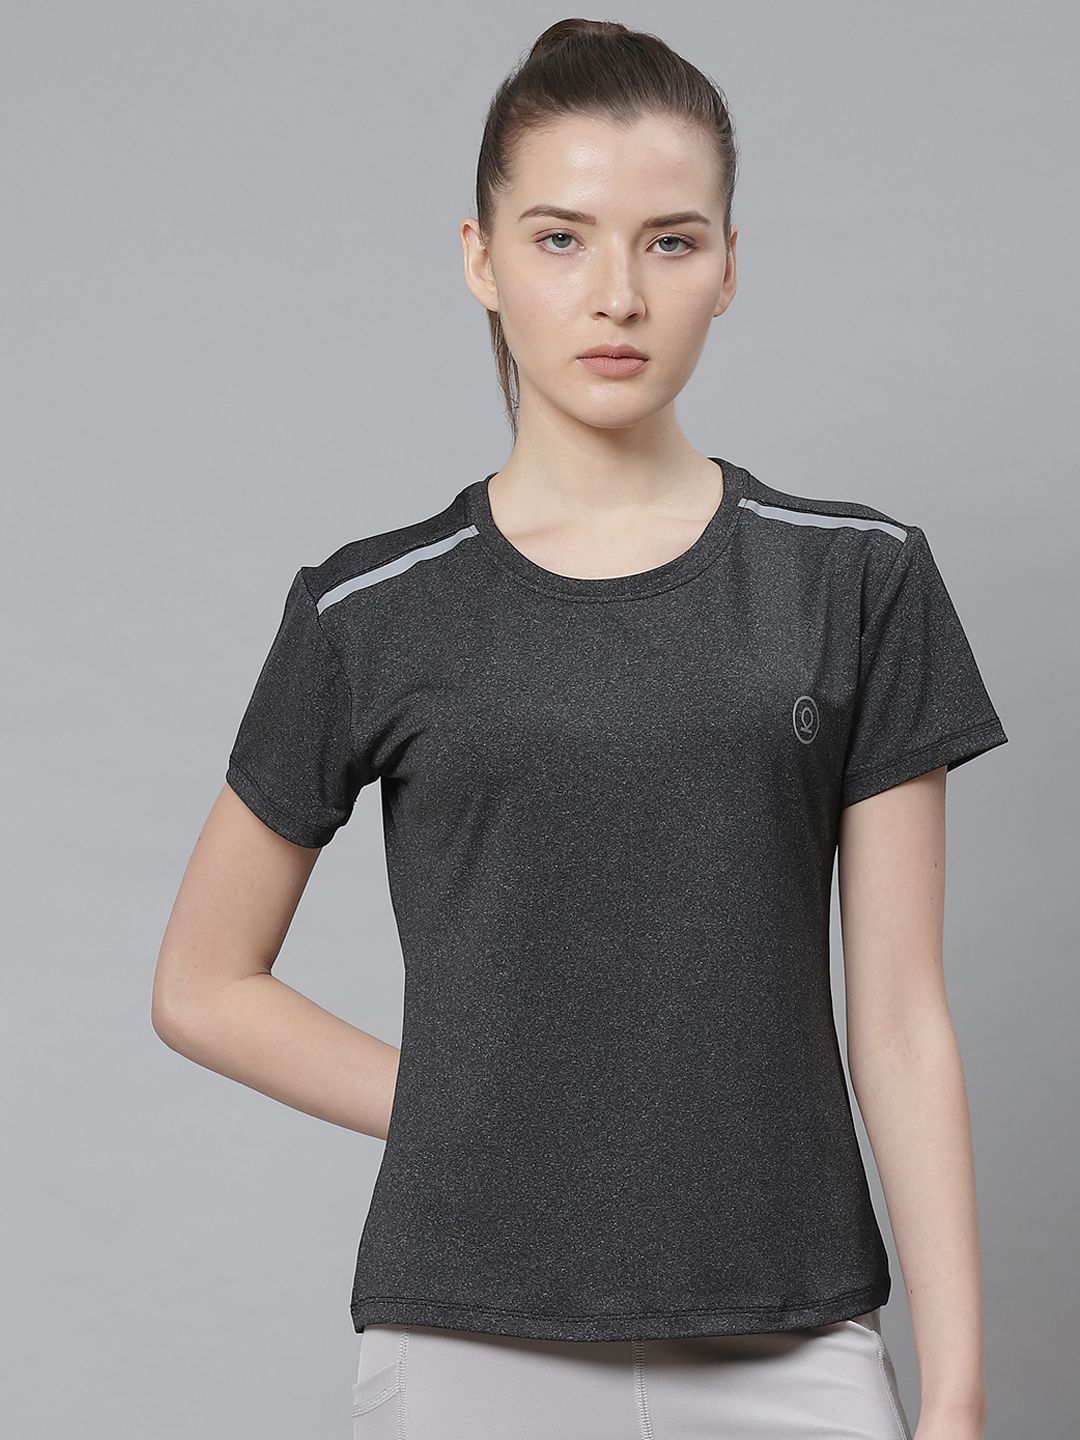 Chkokko Women Charcoal Grey Solid Round Neck Yoga T-shirt Price in India